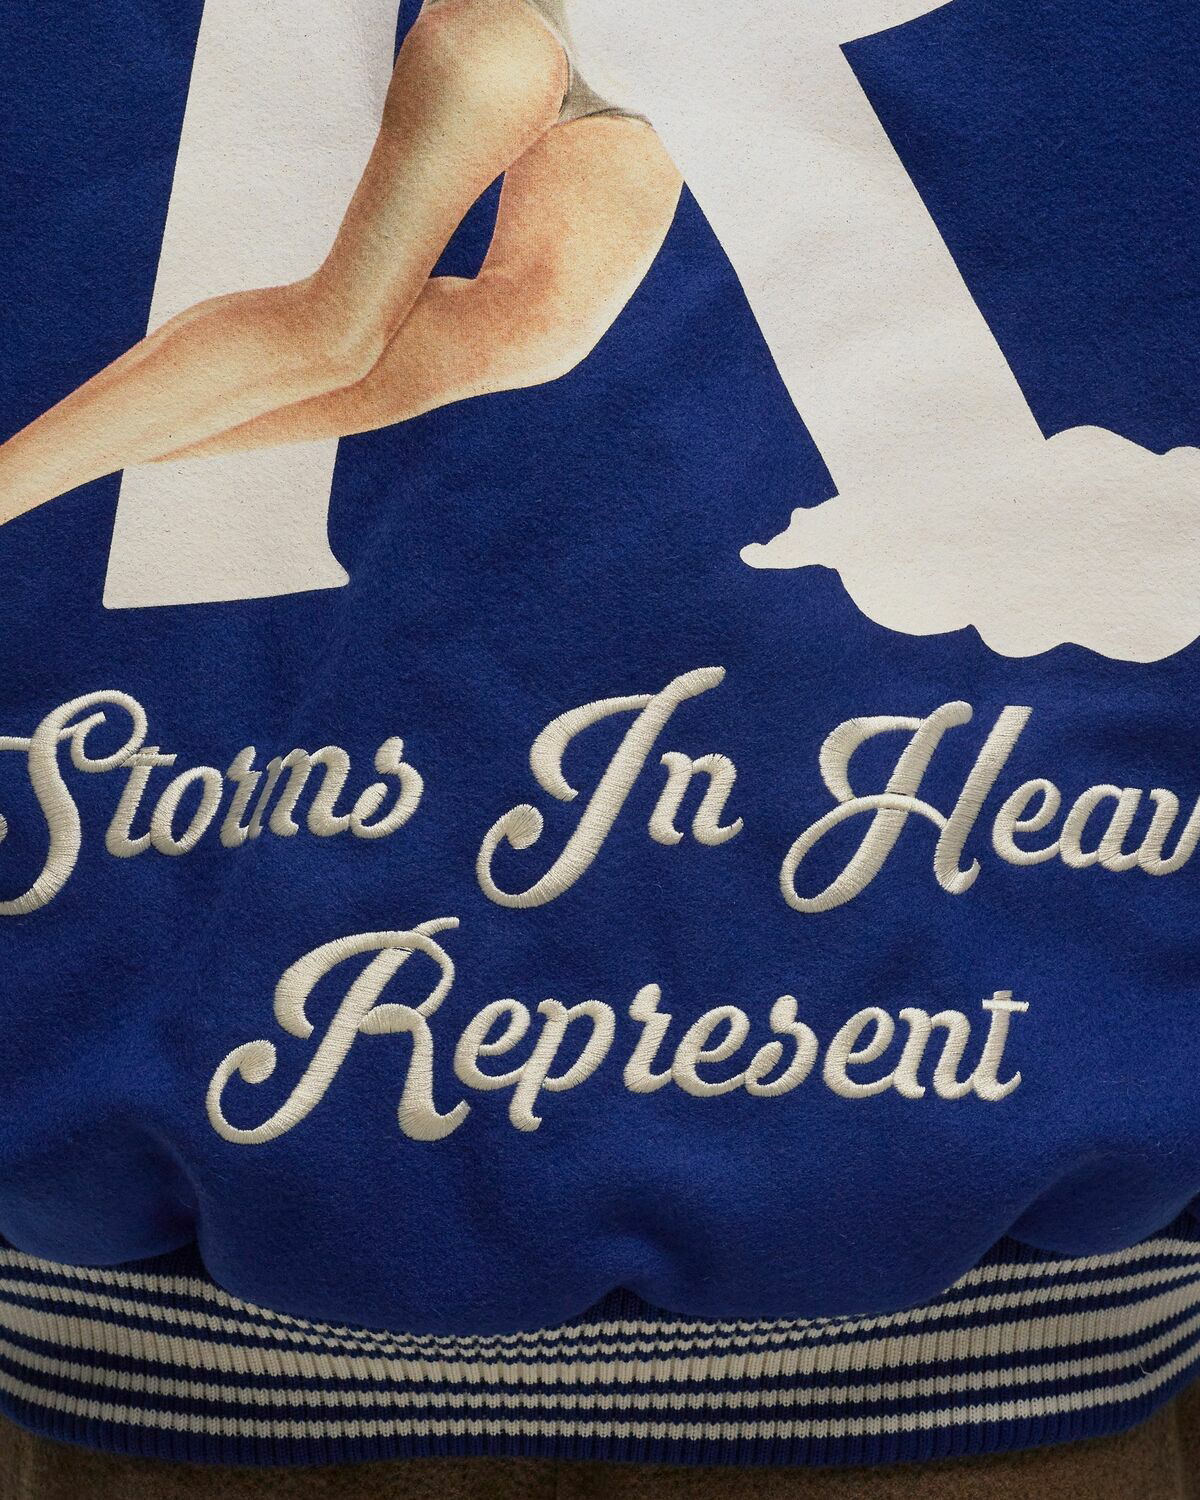 Represent Storms In Heaven Wool-blend Varsity Jacket in Blue for